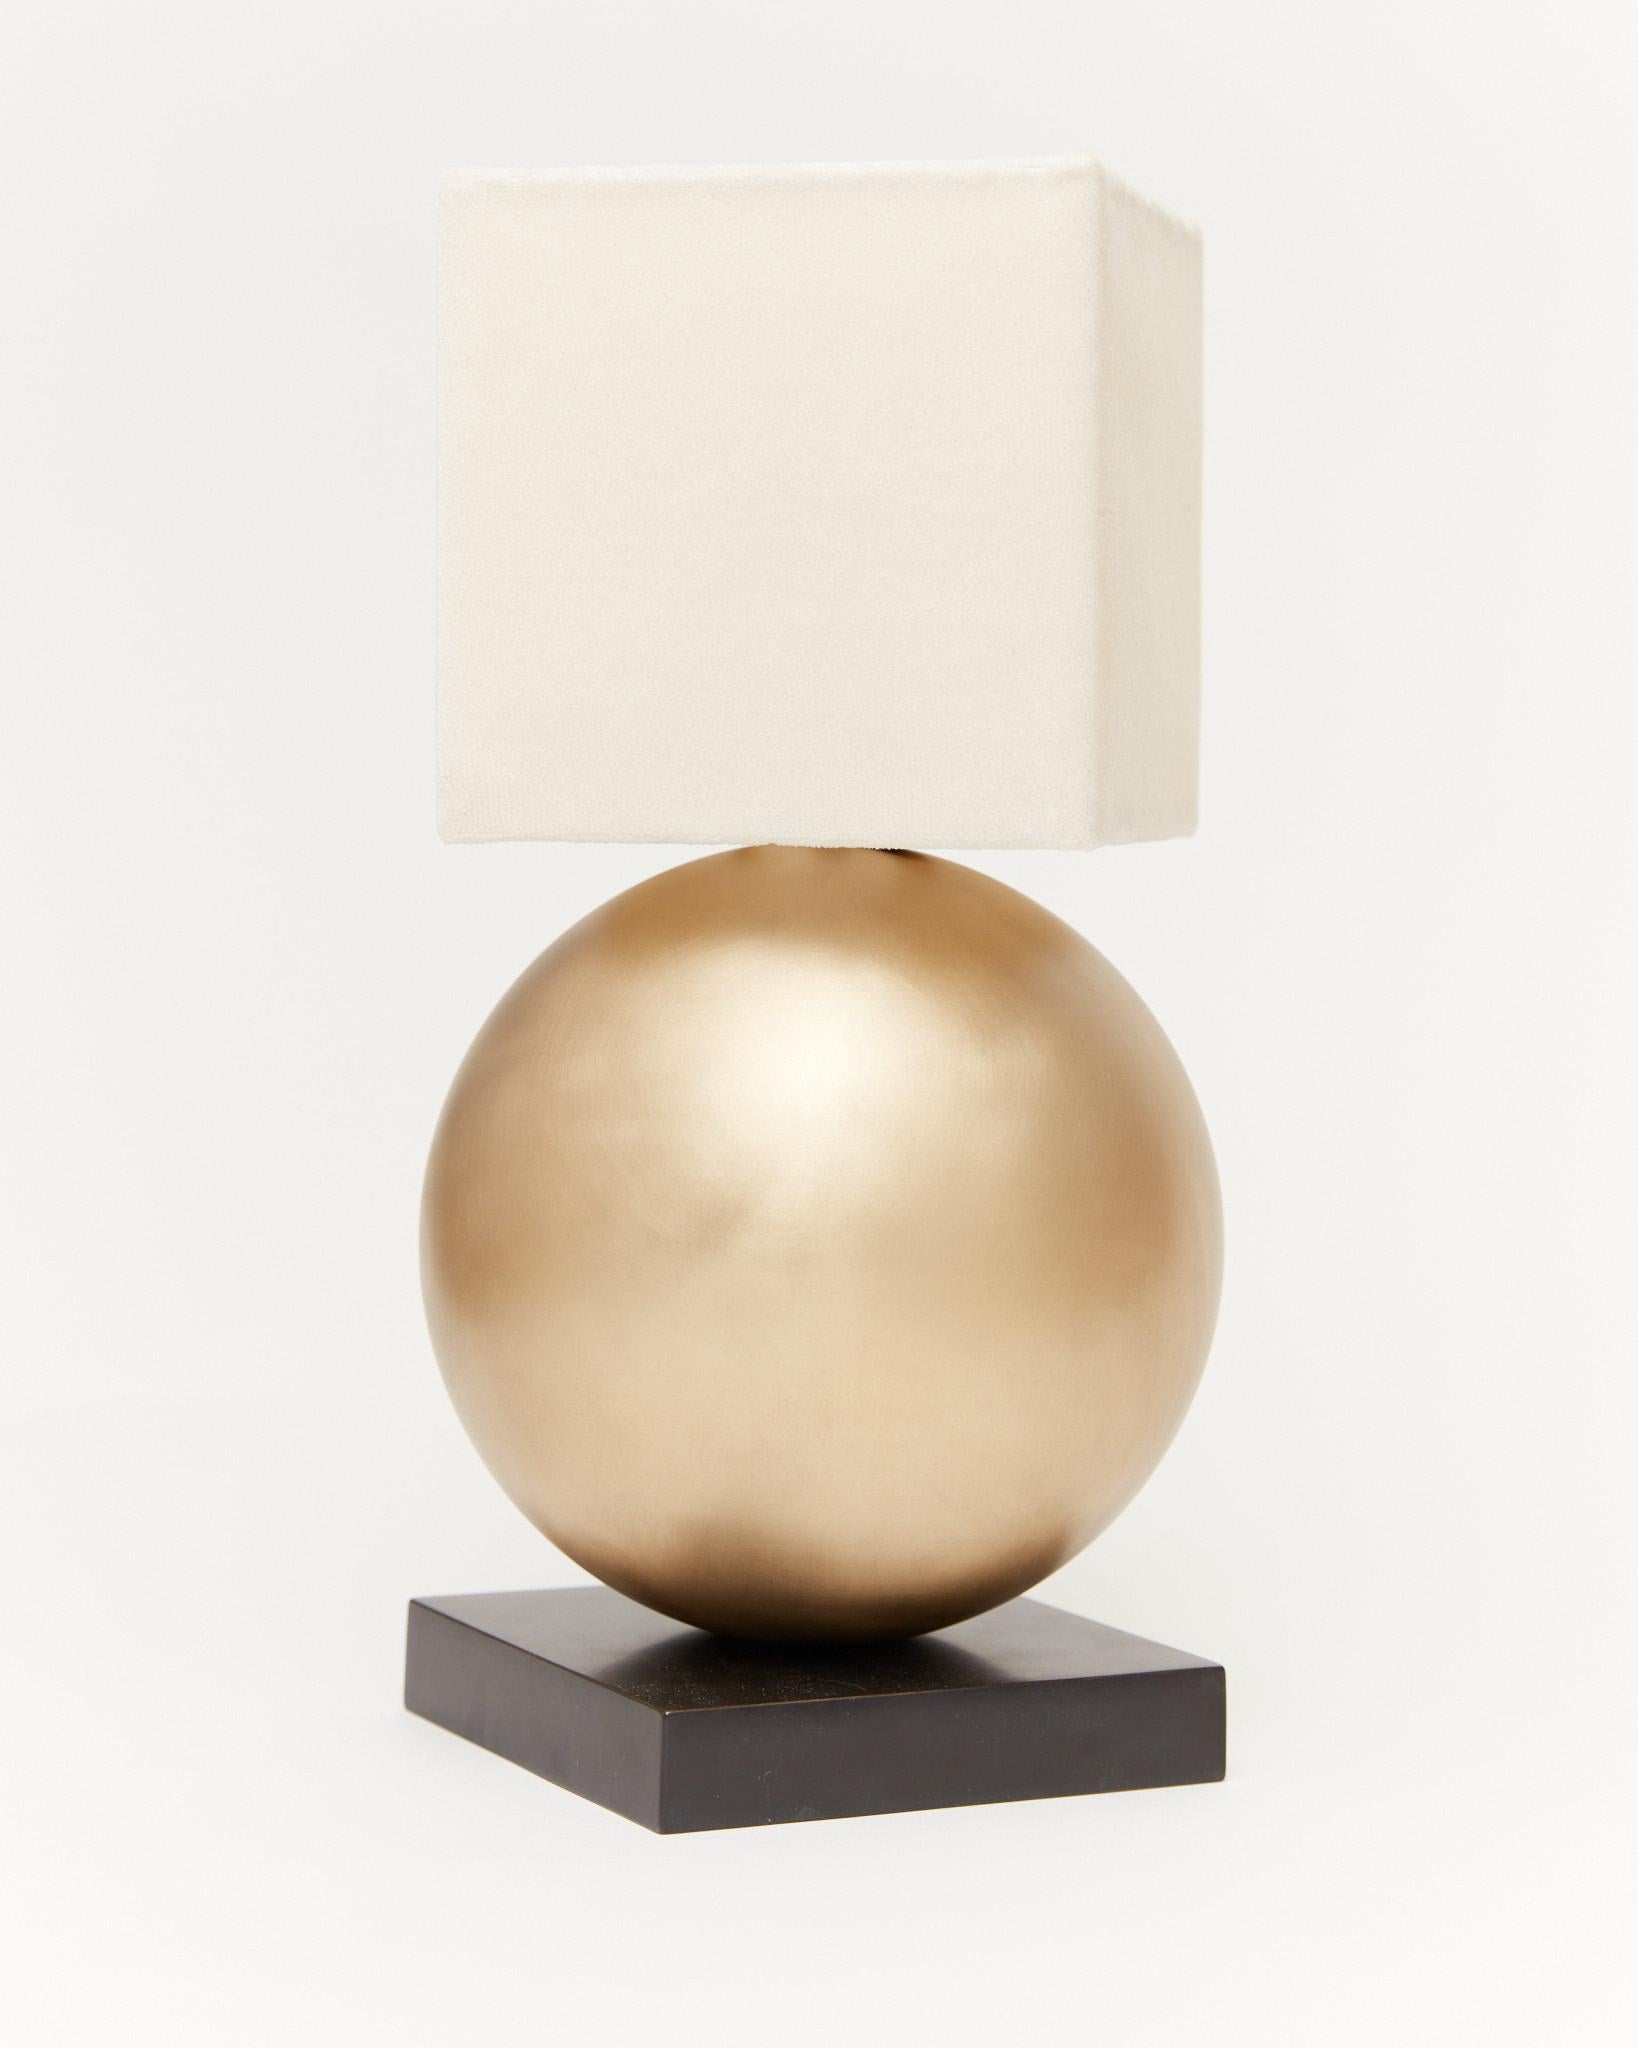 Brushed and blackened brass globe and base with a hand stitched silk velvet shade.

UL listed brass lighting components with in-line switch cord. Wired with Type A plug for North America. Additional wiring options available upon request.

Size